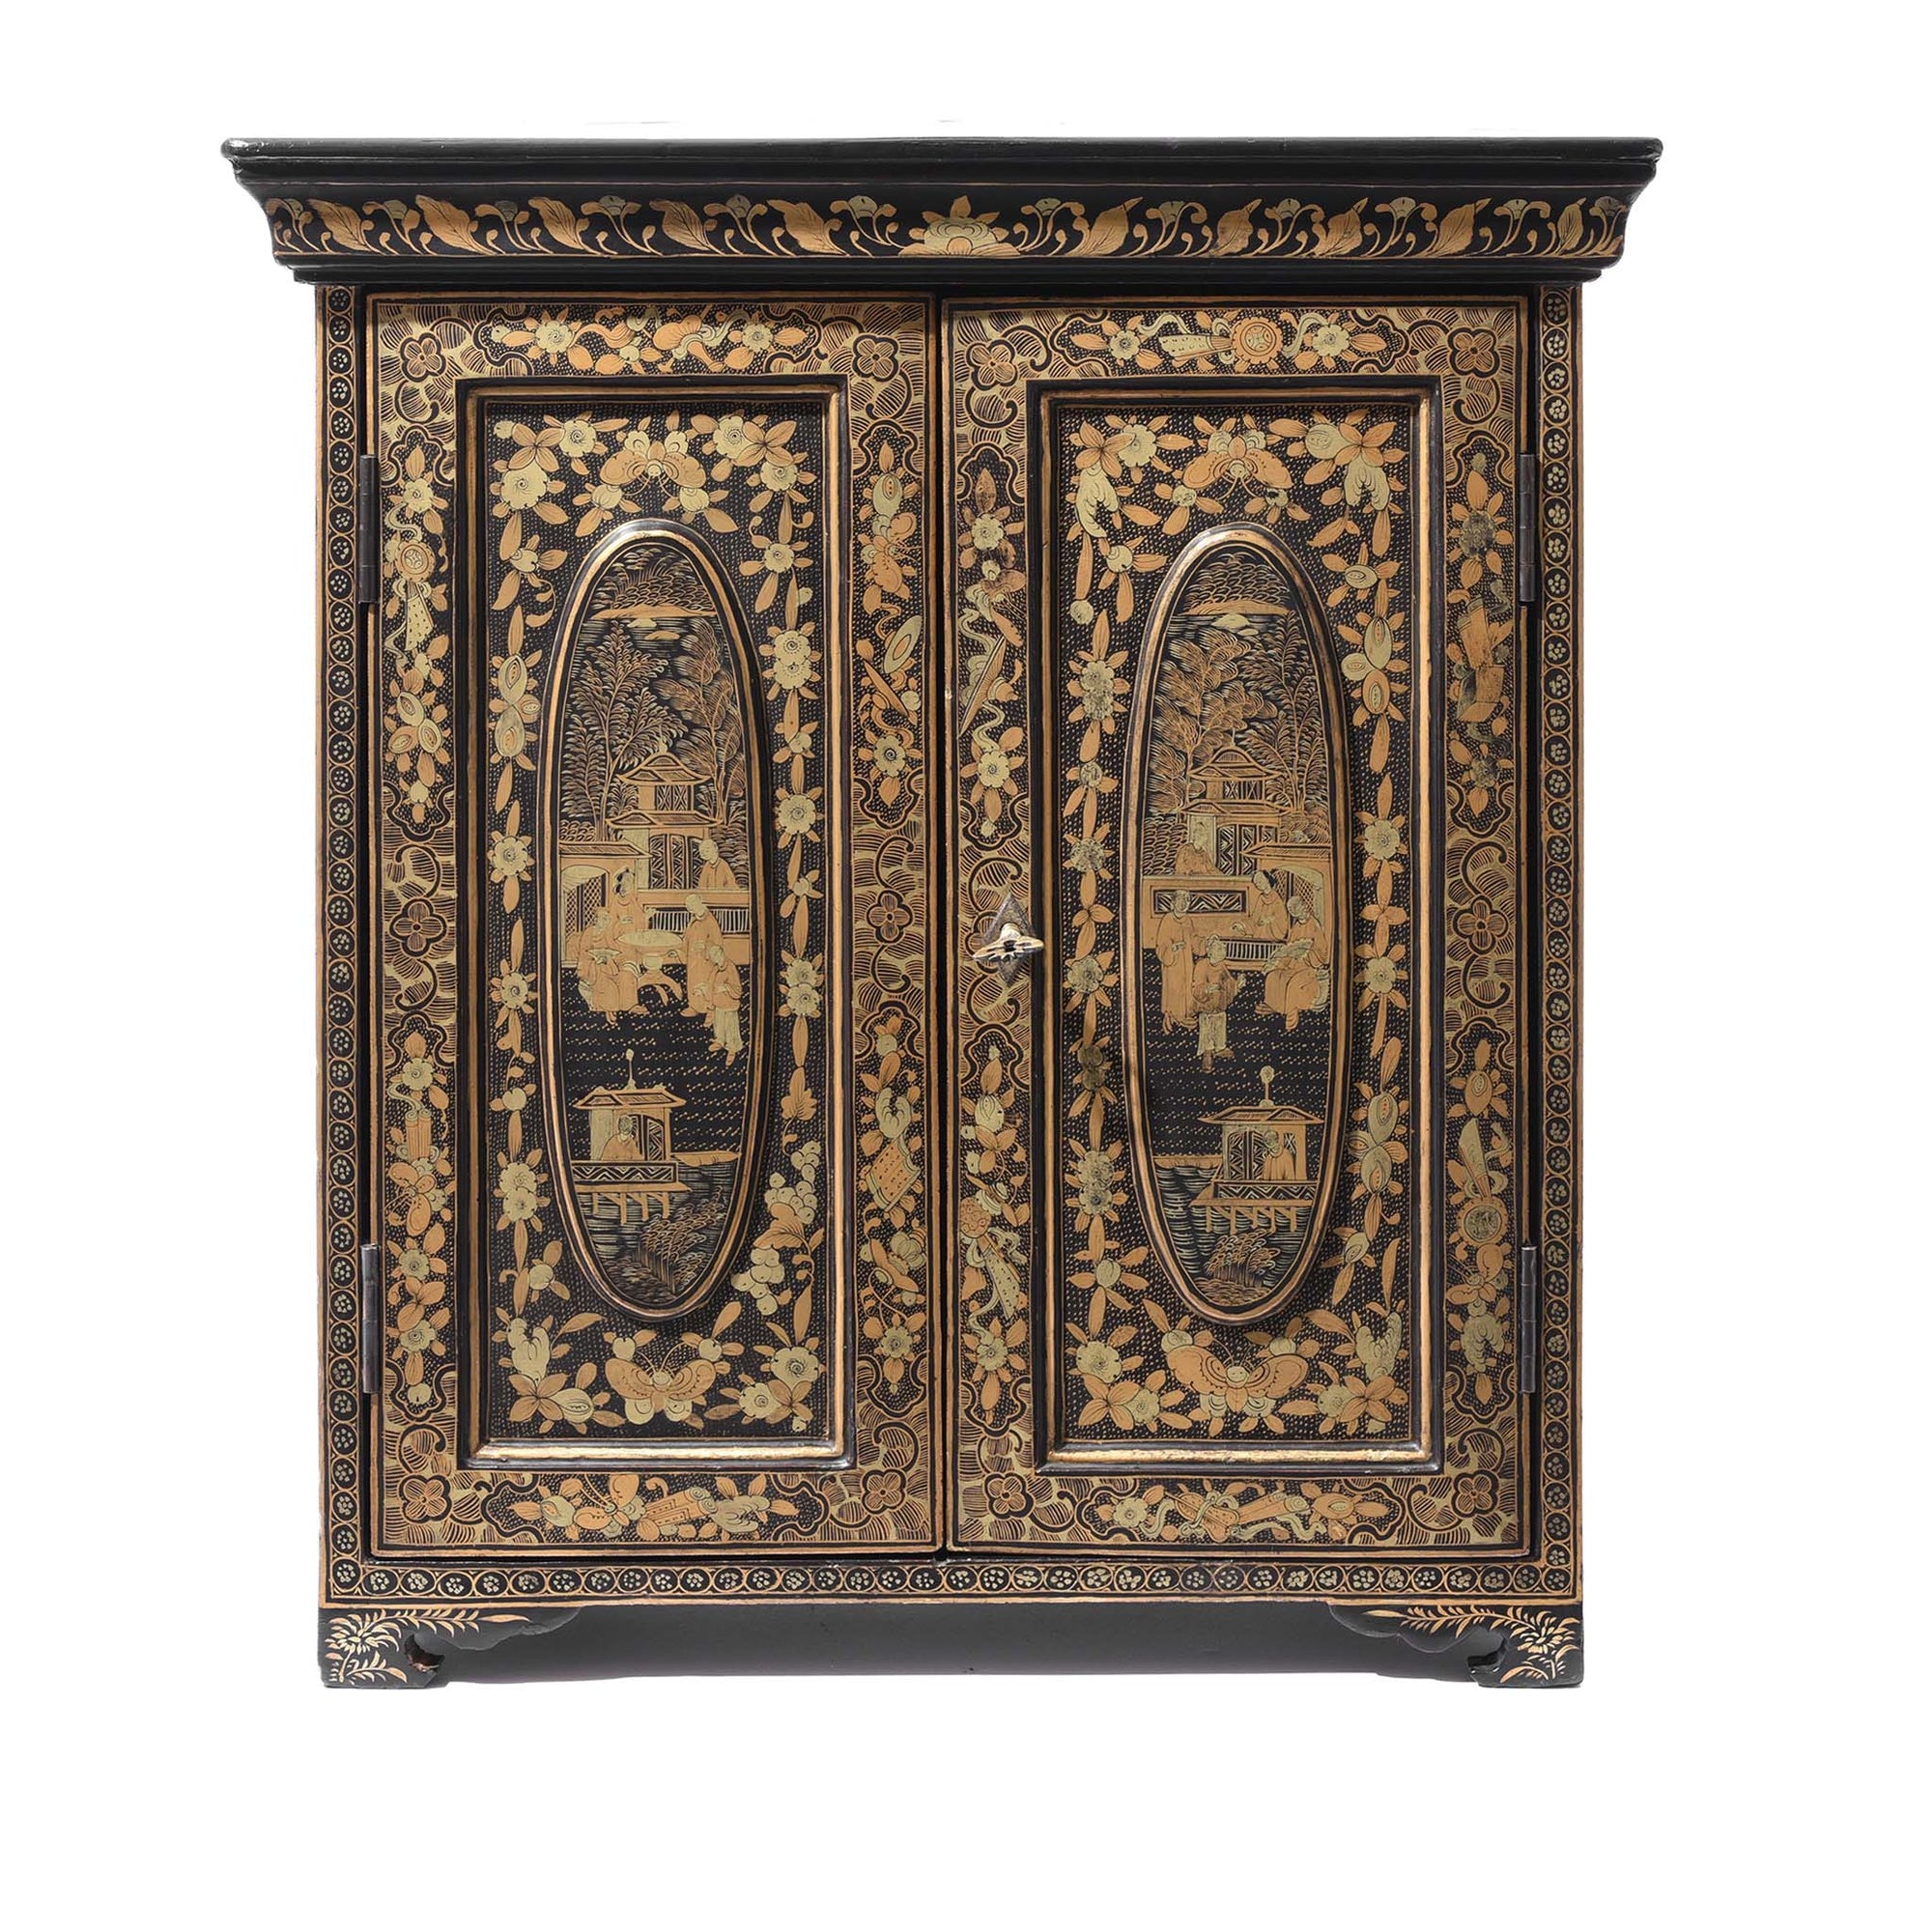 Gilt Black Lacquer Jewellery Cabinet - Early 19thC | Indigo Antiques